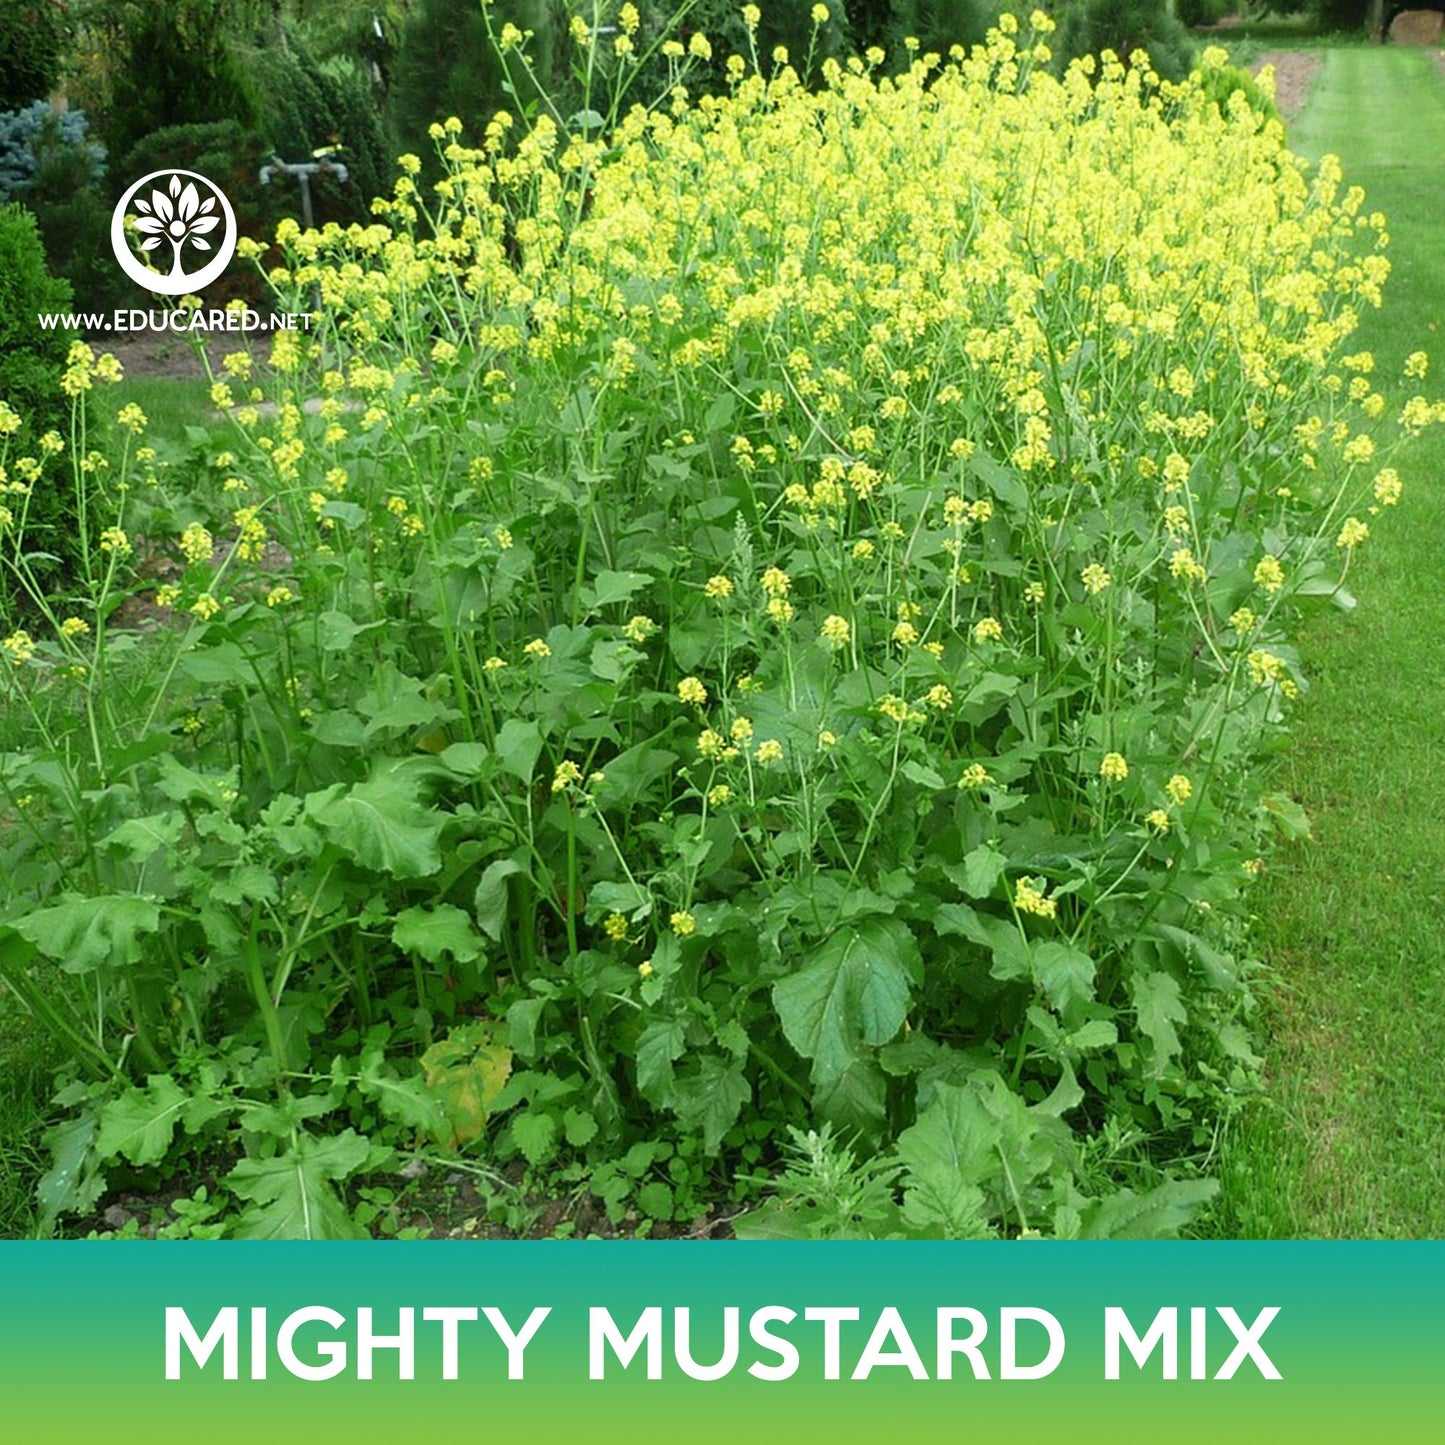 Mighty Mustard Mix Seeds, Mighty Mustard Trifecta Power Blend Cover Crop